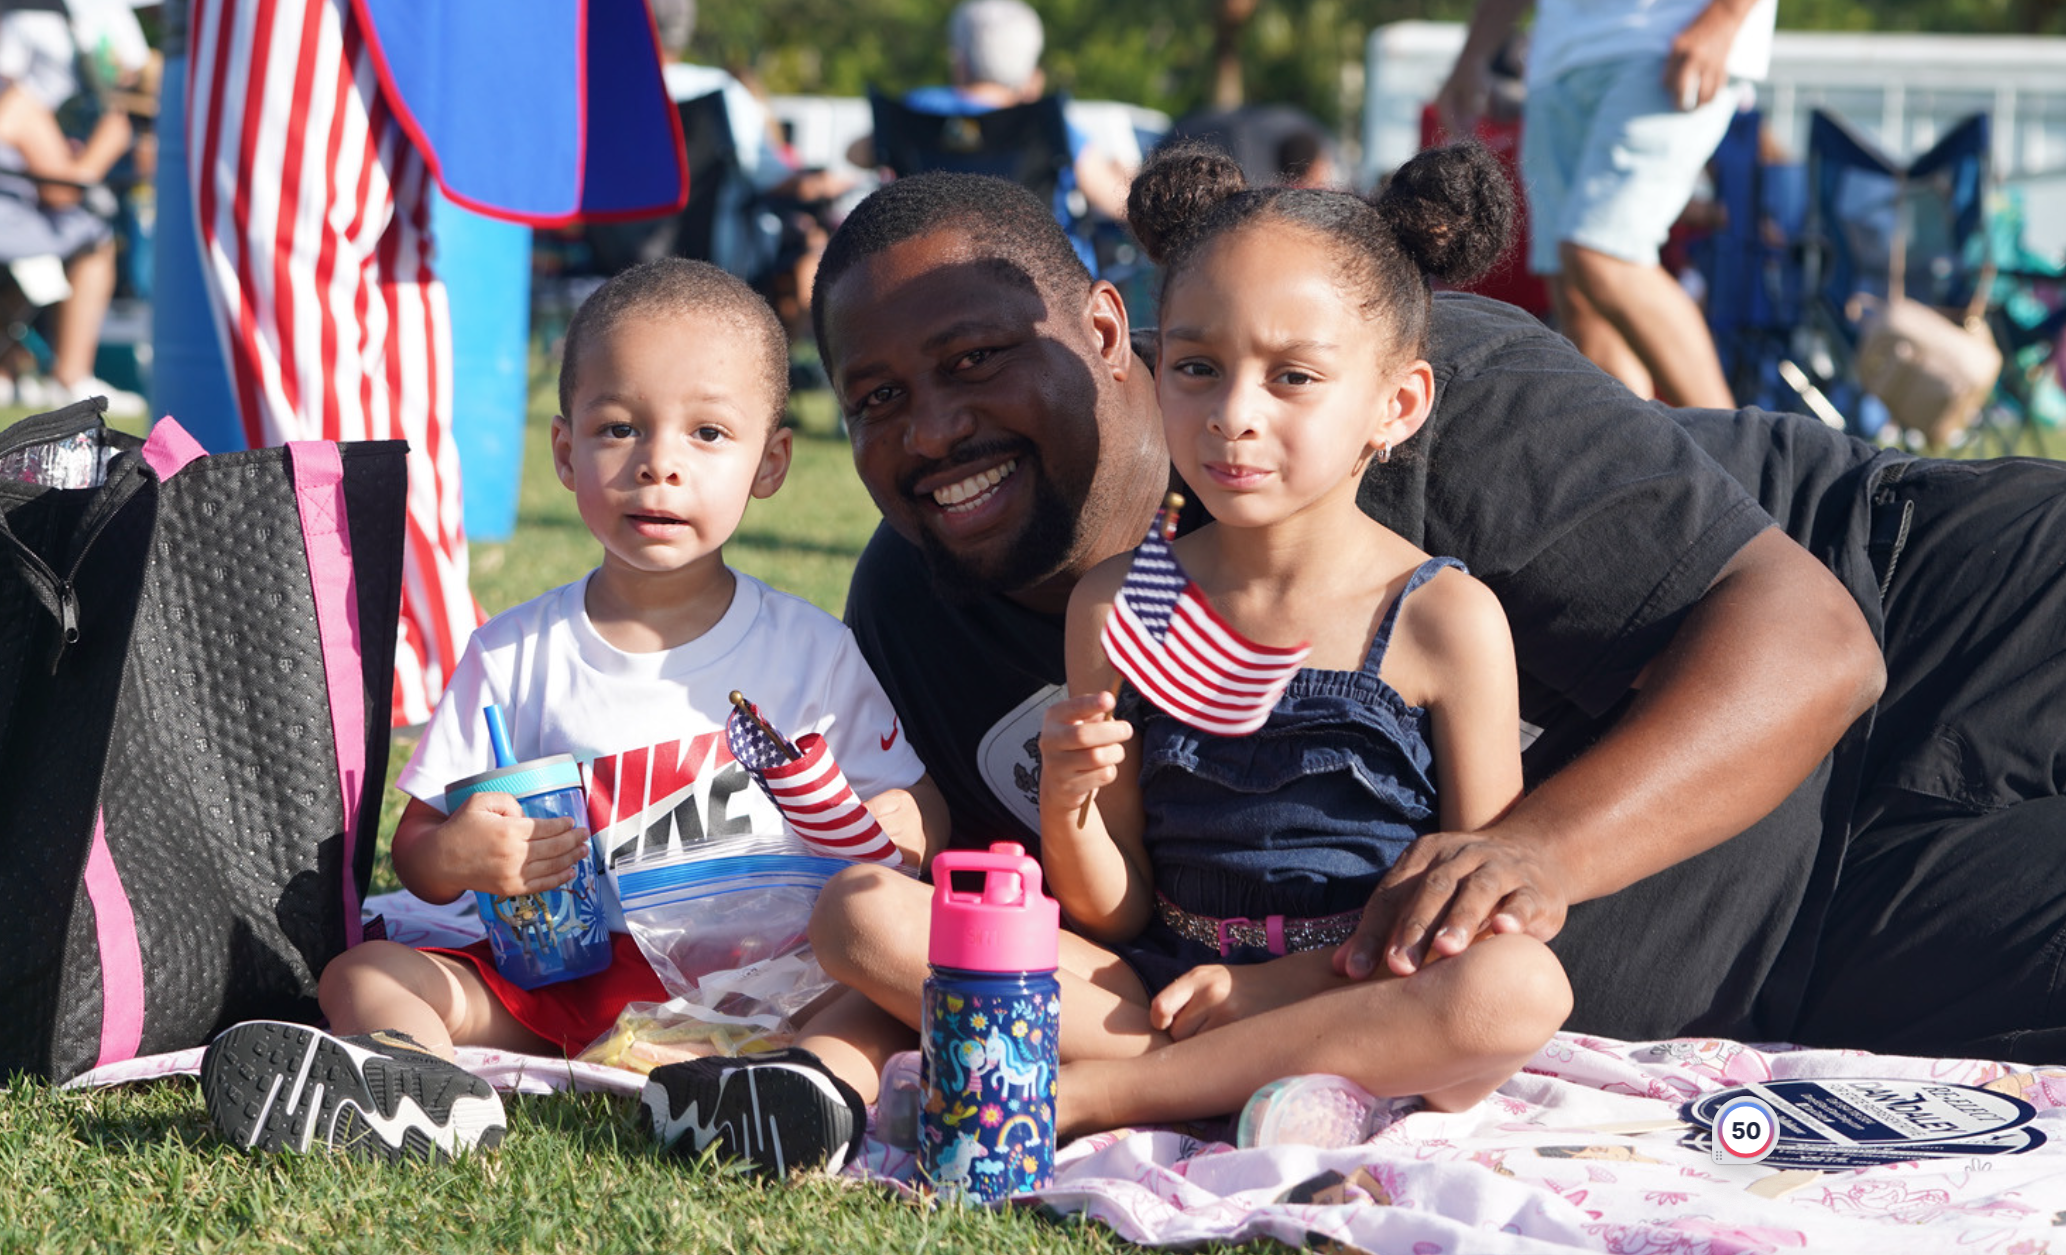 Tamarac’s 4th of July Celebration Features Music, Food, Fireworks, and Fun